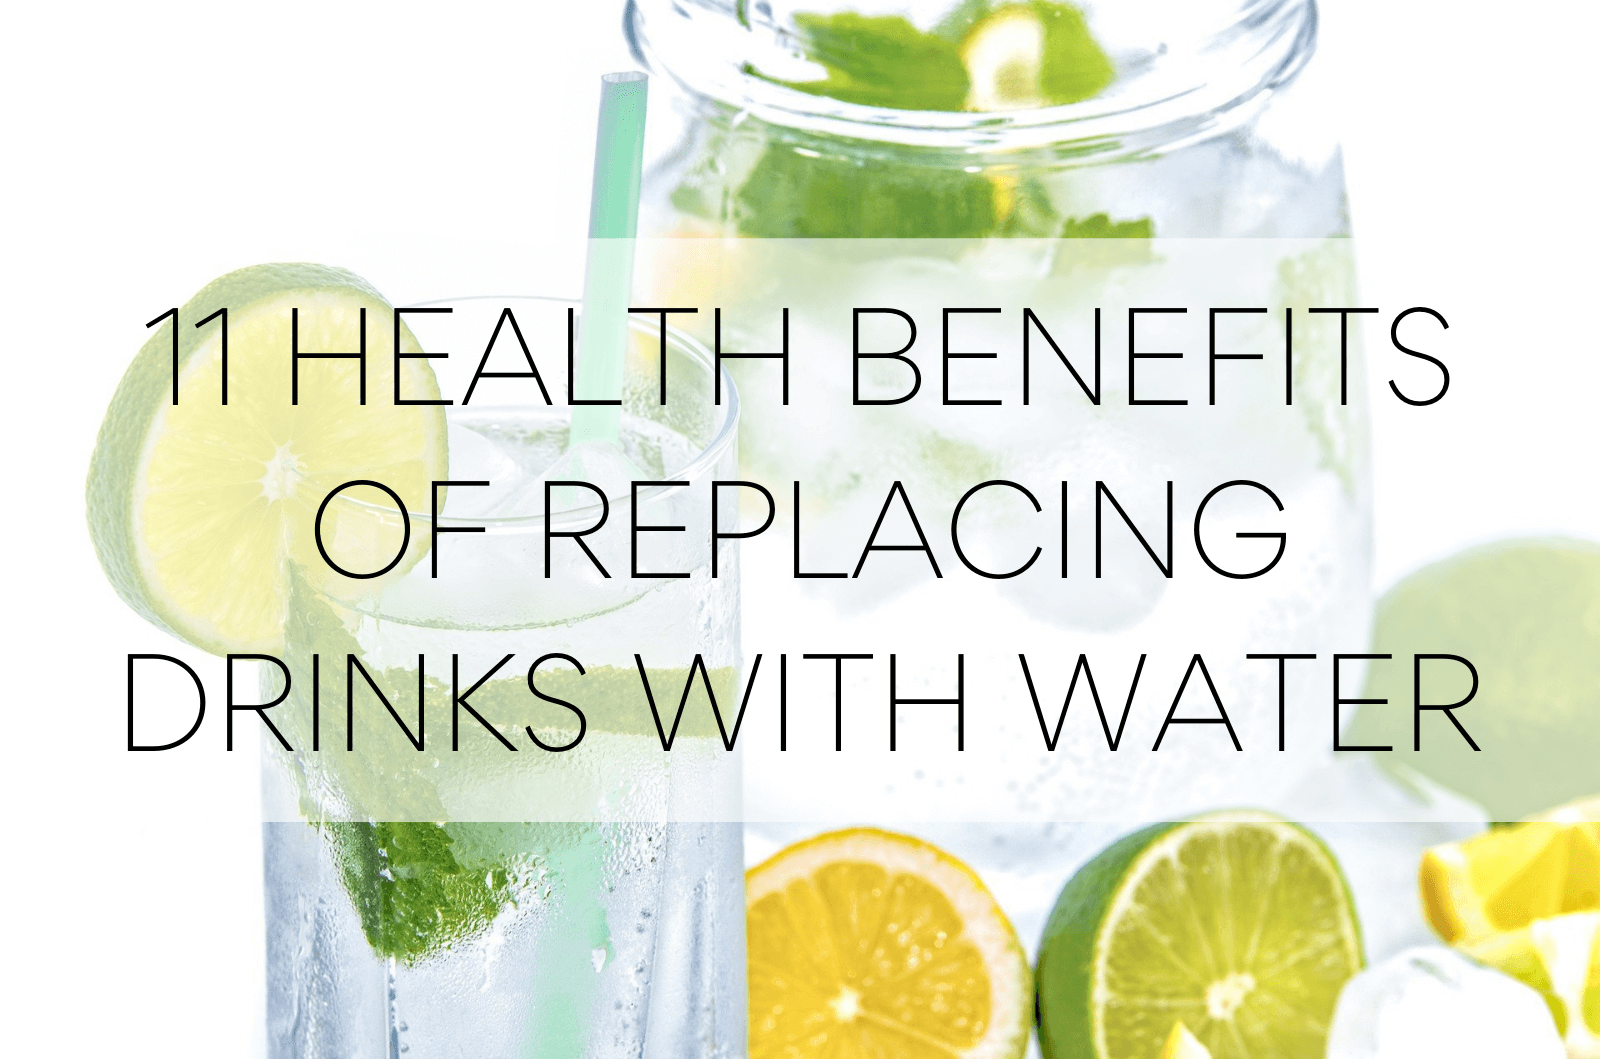  Health Benefits Of Replacing Drinks With Water-